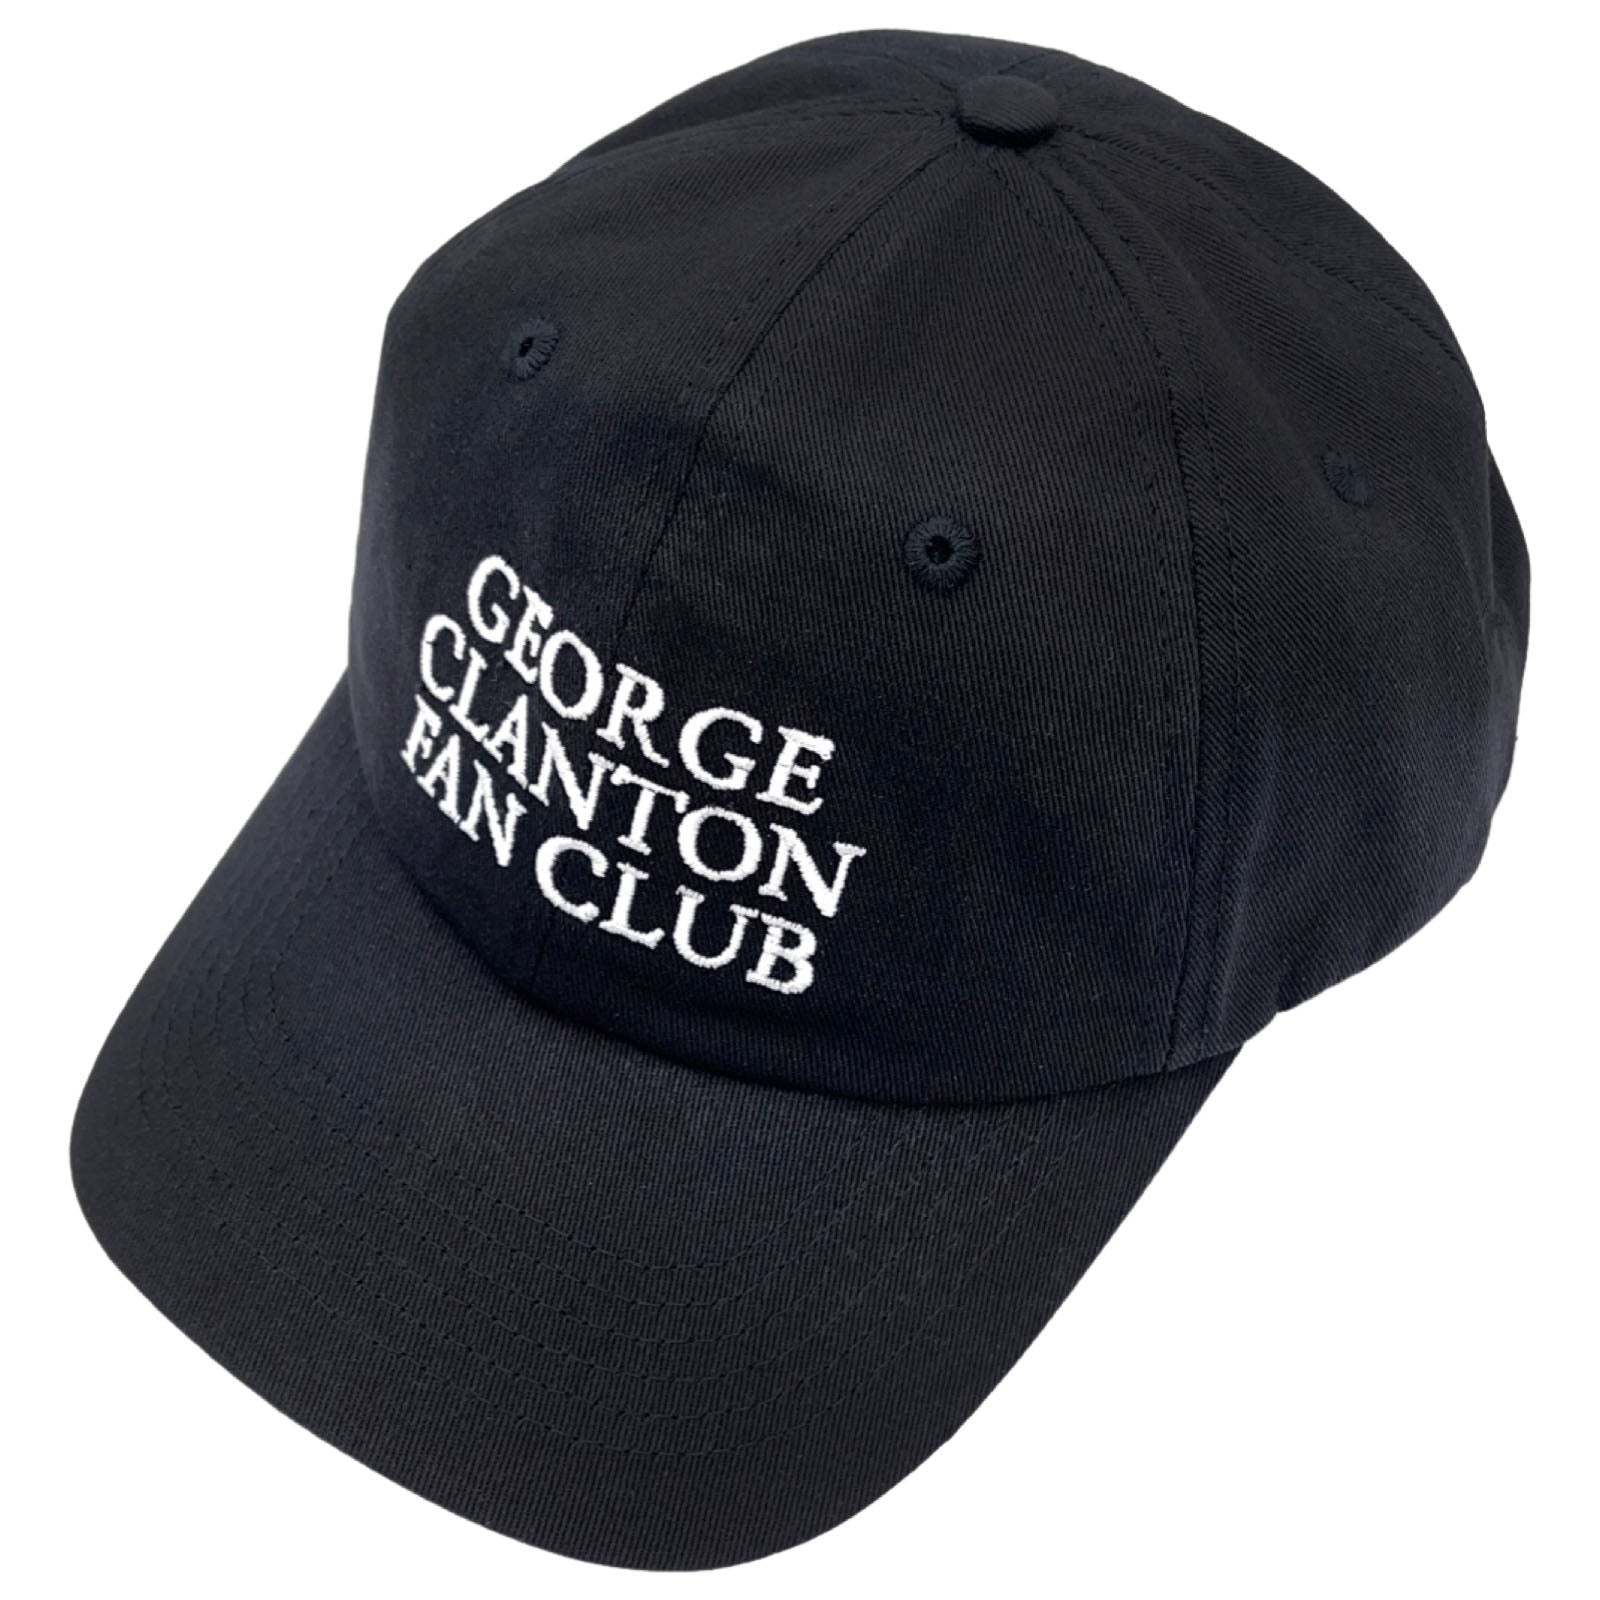 George Clanton Fan Club - George Clanton Fan Club Cap - 100% Electronica Official Store (Photo 1)